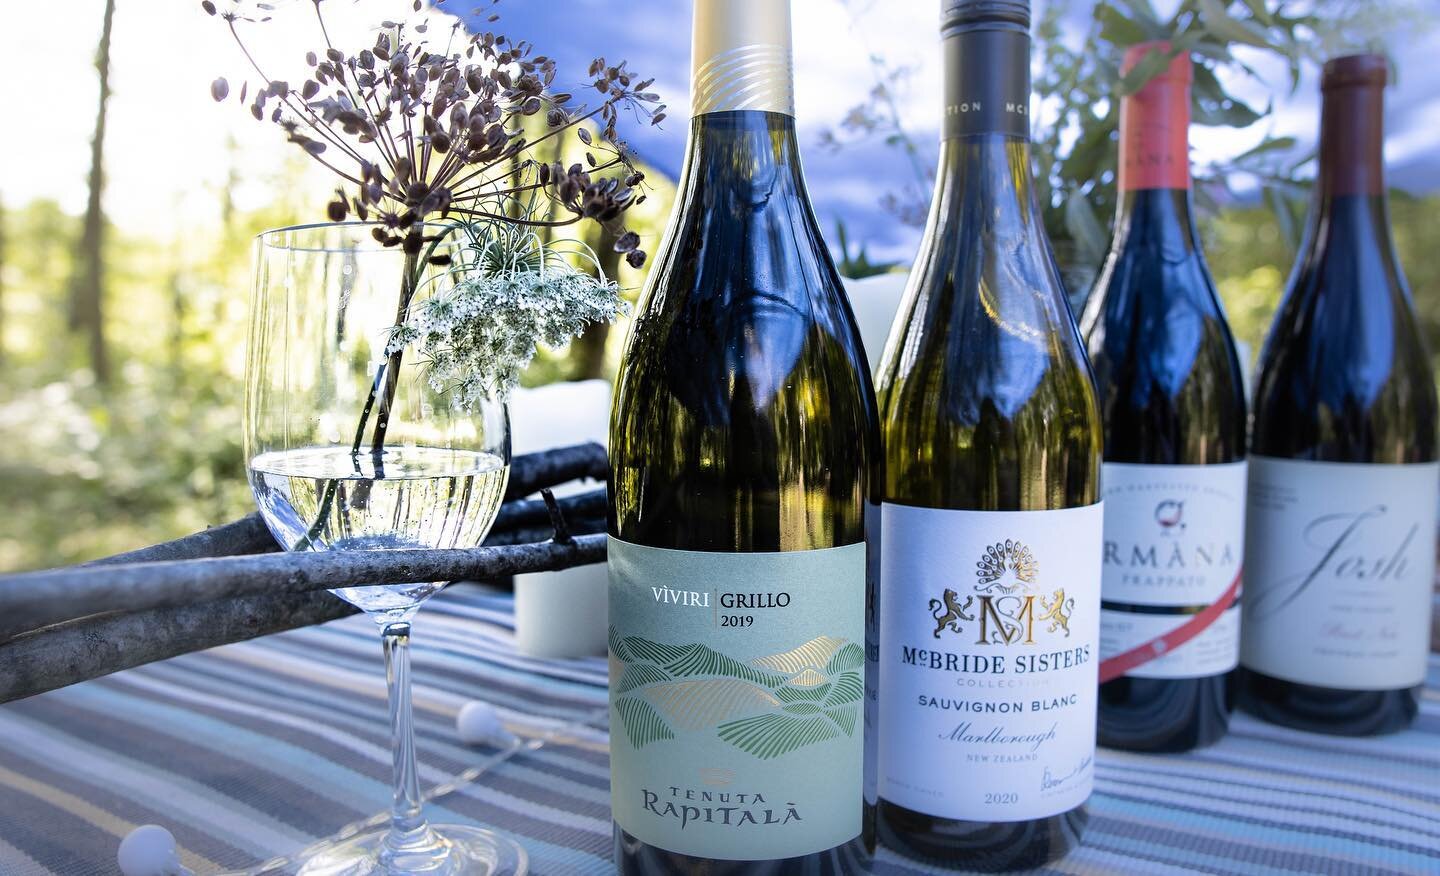 If you know me, you&rsquo;ll always hear me talking about food. What i&rsquo;ve eaten, what i&rsquo;ve made and how to make my cuisine better everyday. One sure fire way to elevate your next outdoor dinner party is to find the perfect pairing of wine